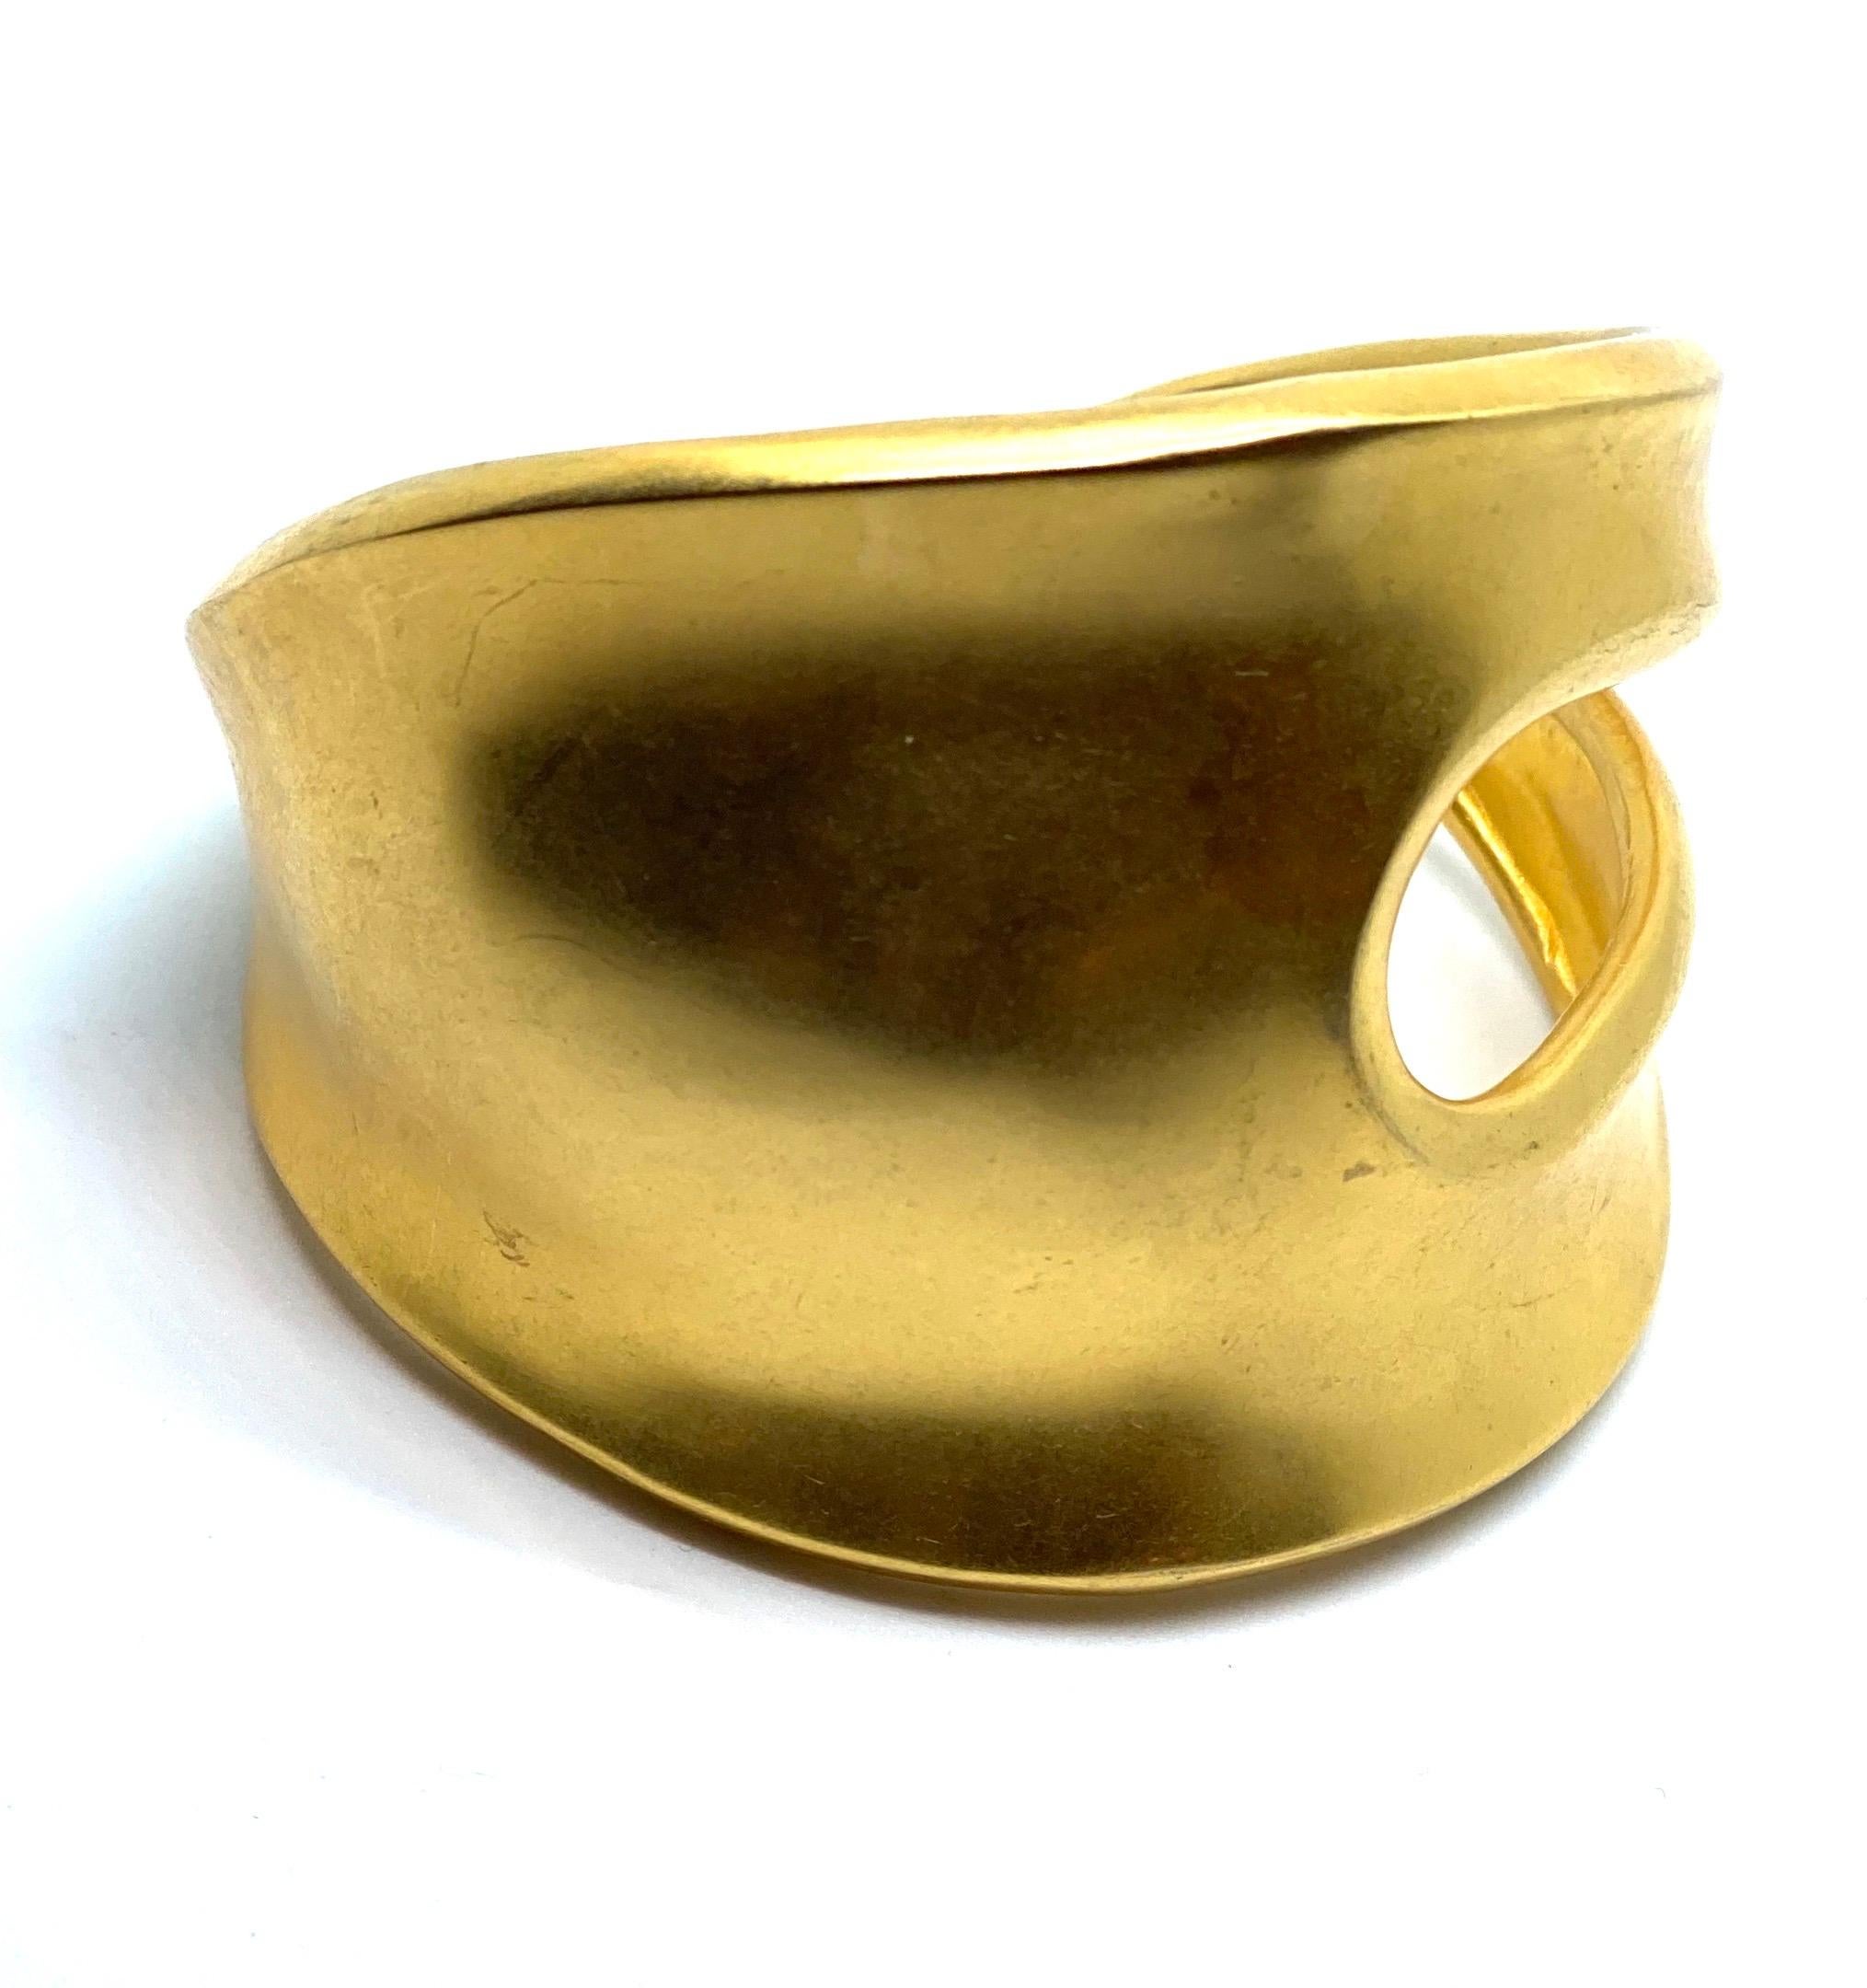 This matte gold plated brass cuff has a dramatic opening in the side of the piece that gives it the name Phantom. The striking positive/negative design is using an eye shaped hole in the face of the cuff that distinguishes this as an iconic Robert